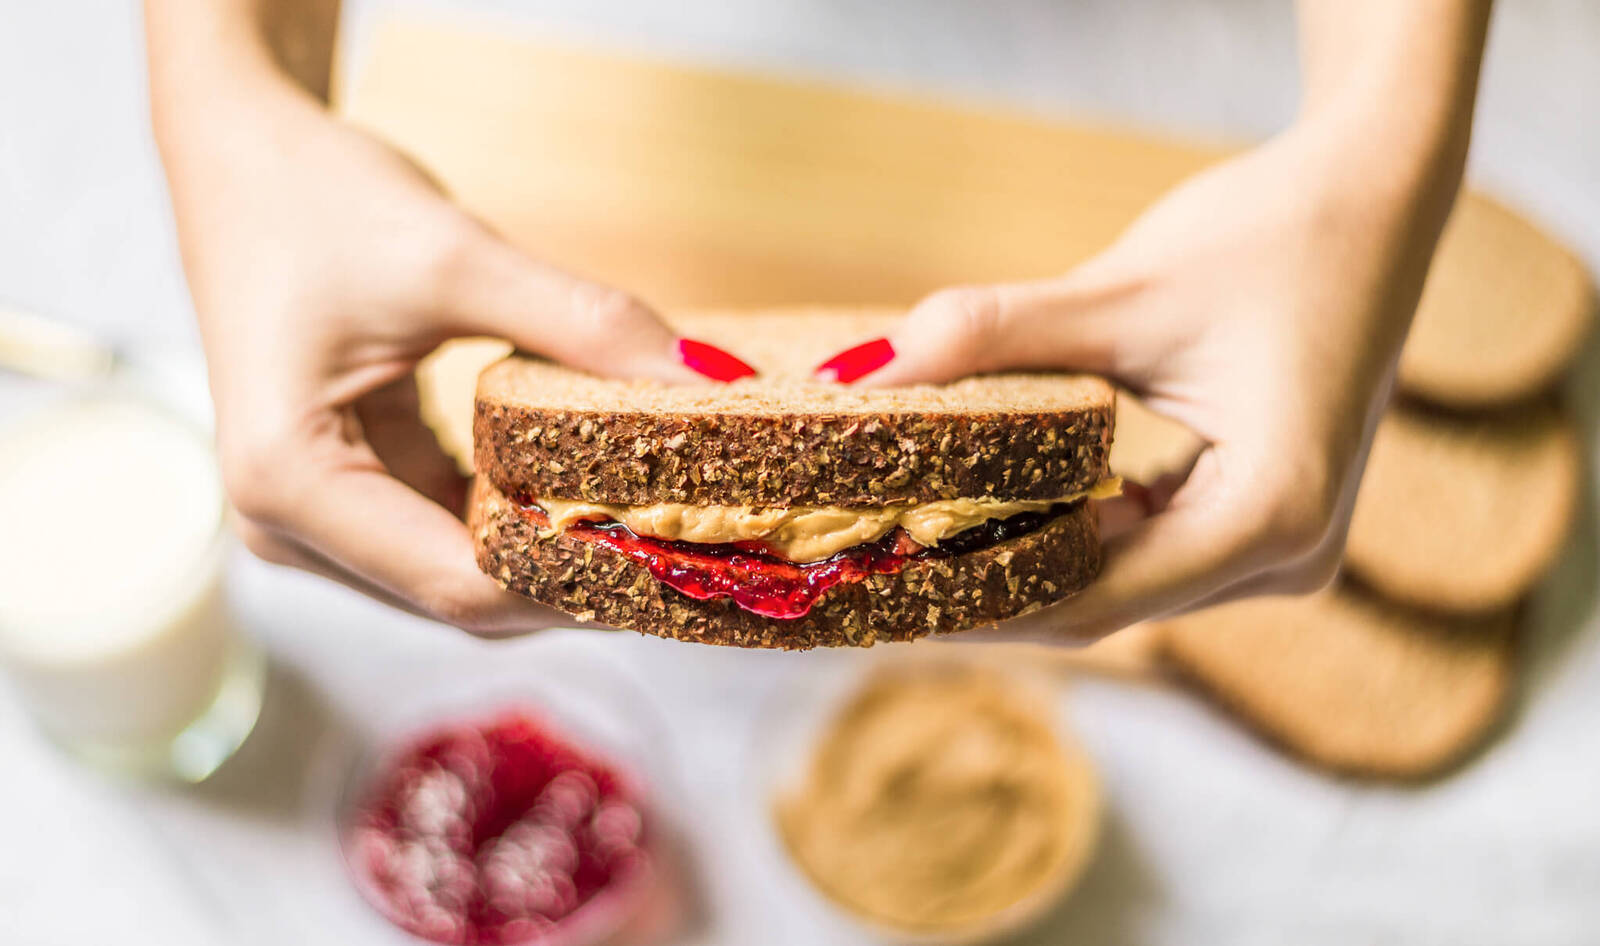 Is that Hot Dog Shaving Minutes Off Your Life? Study Says Eat a PB&amp;J Instead.